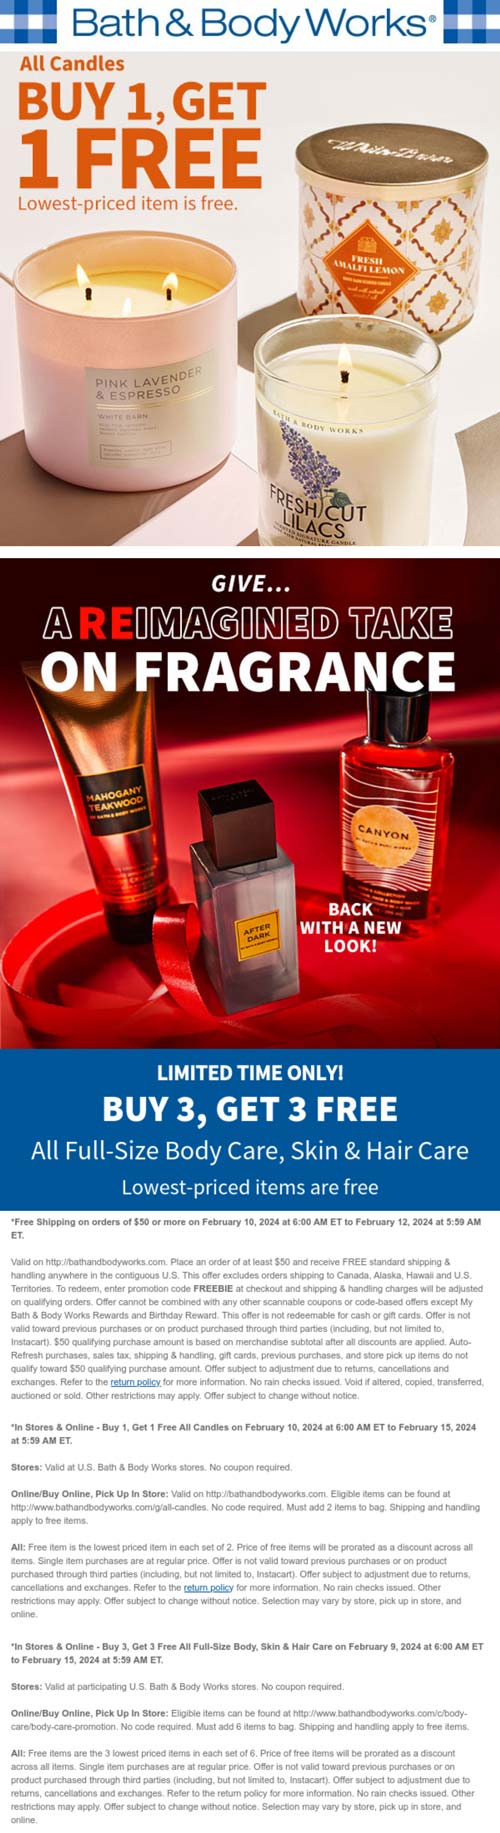 Bath & Body Works stores Coupon  6-for-3 on body care & second candle free at Bath & Body Works via promo code FREEBIE #bathbodyworks 